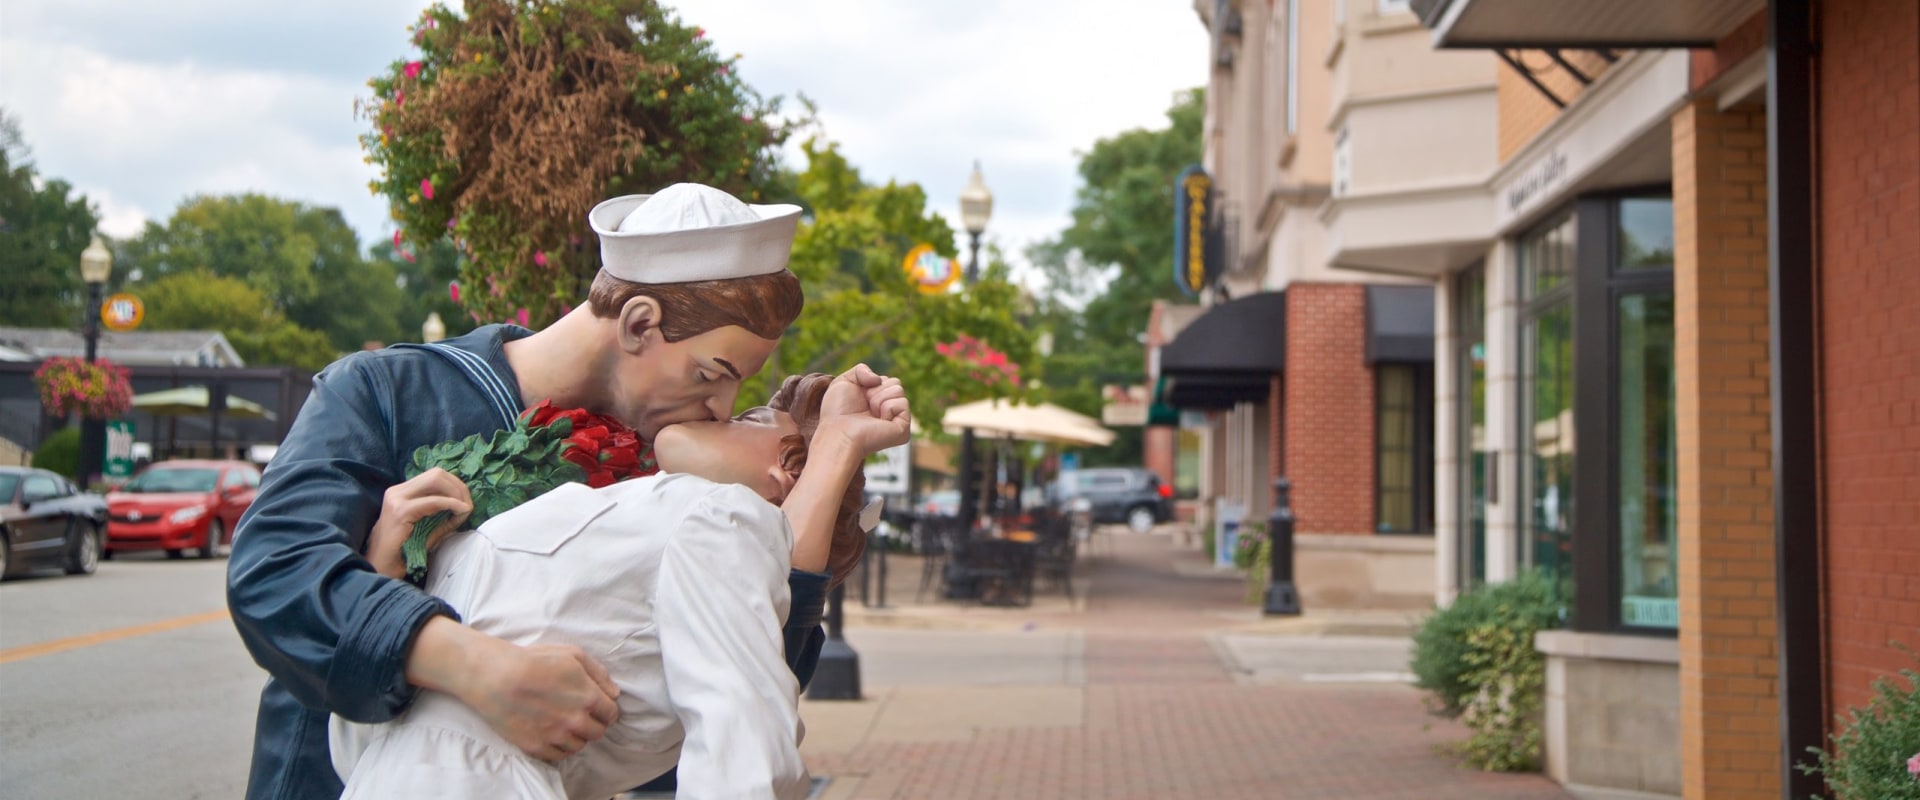 What are the Top Family-Friendly Activities to Do in Carmel, Indiana?